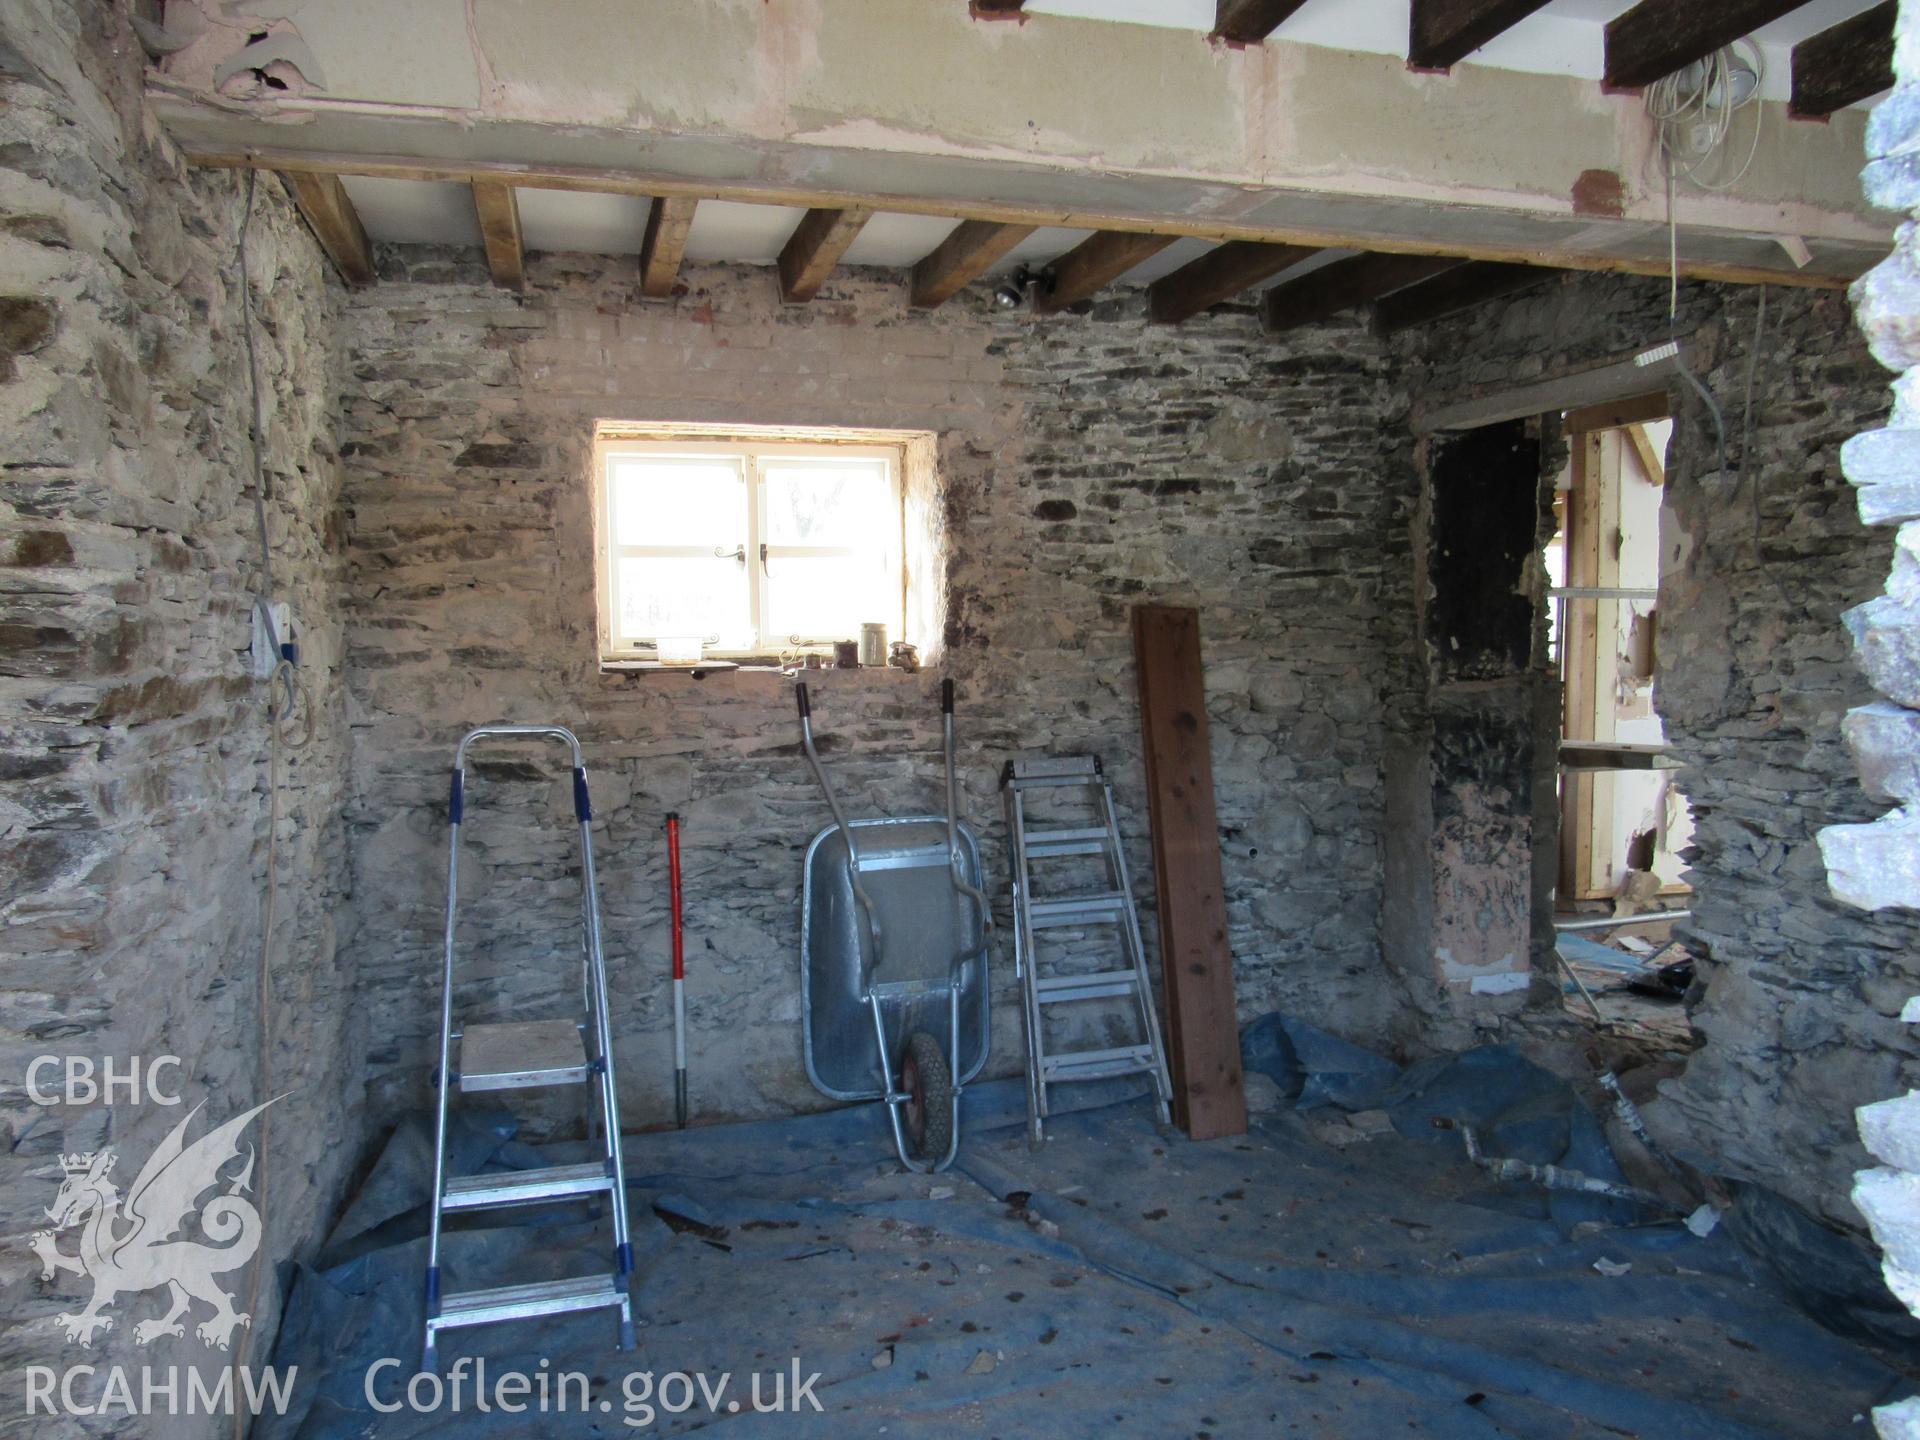 Kitchen in original house with inserted doorway to modern extension, view south-west. Photographed for archaeological building recording conducted at Bryn Ysguboriau, Llanelidan, Denbighshire, carried out by Archaeology Wales, 2018. Project no. P2587.